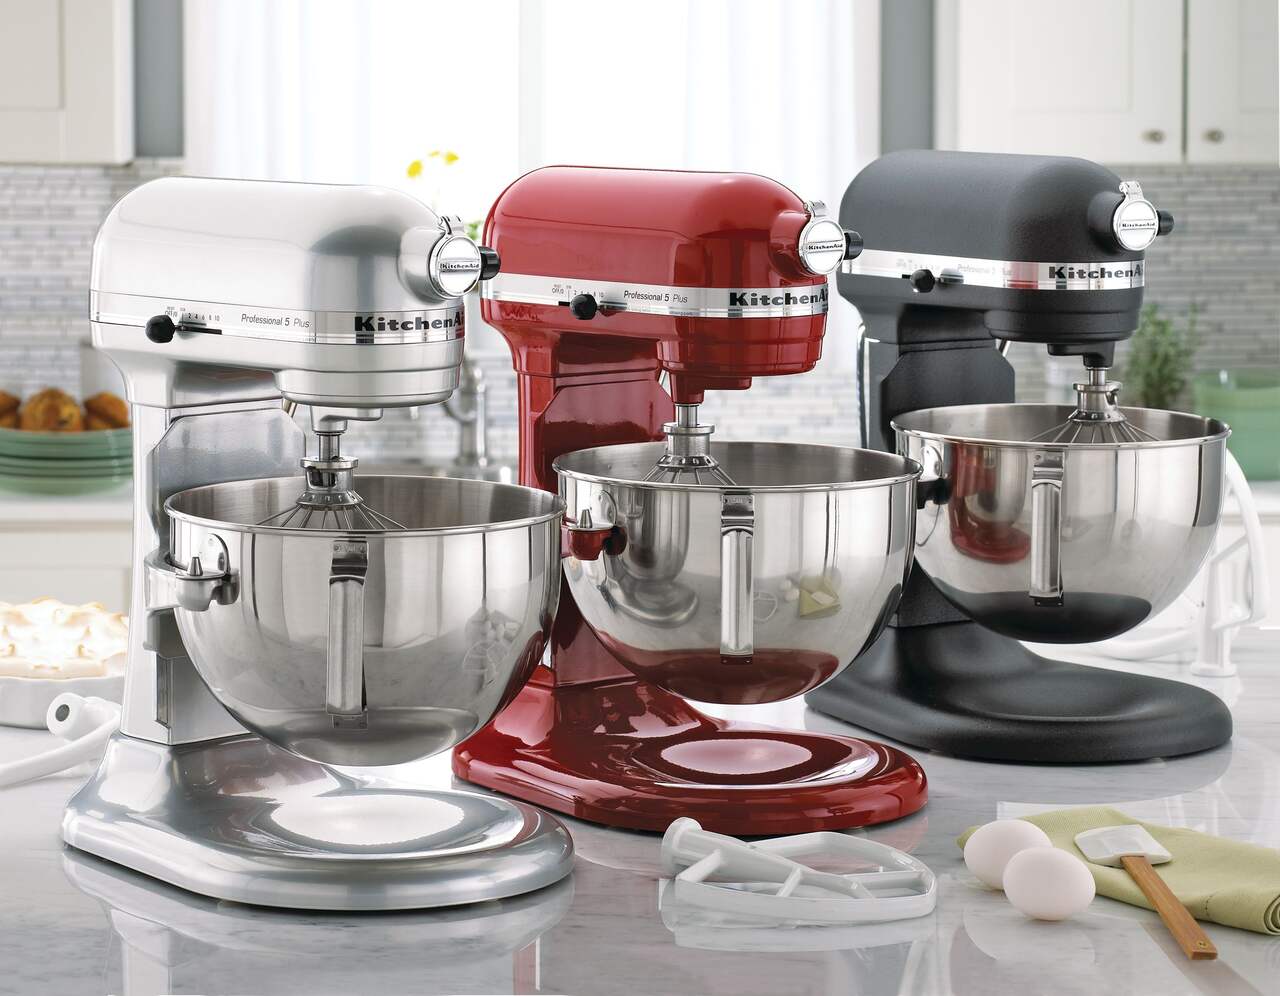 https://media-www.canadiantire.ca/product/living/kitchen/kitchen-appliances/0432170/kitchen-aid-pro-stand-mixer-metallic-chrome-3e9f9e9a-5e64-471b-8796-09636a3e681a-jpgrendition.jpg?imdensity=1&imwidth=1244&impolicy=mZoom